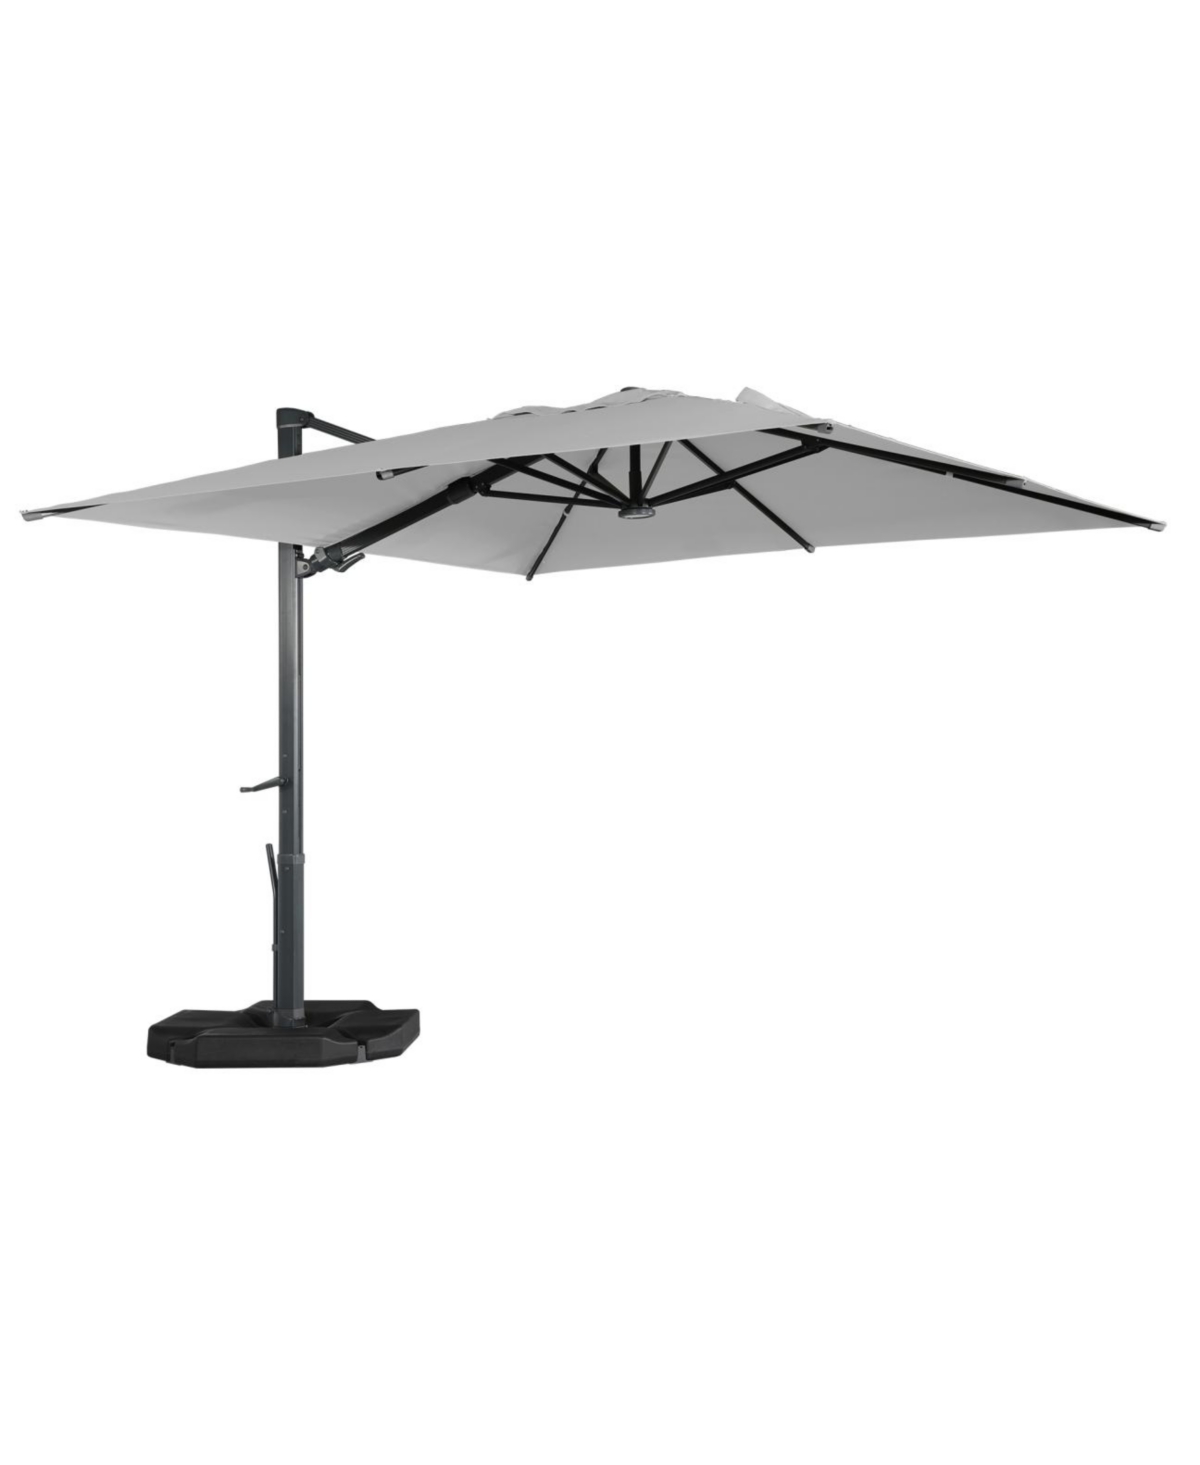 13ft Square Solar Led Cantilever Patio Umbrella with Tilt for Outdoor Shade - Gray